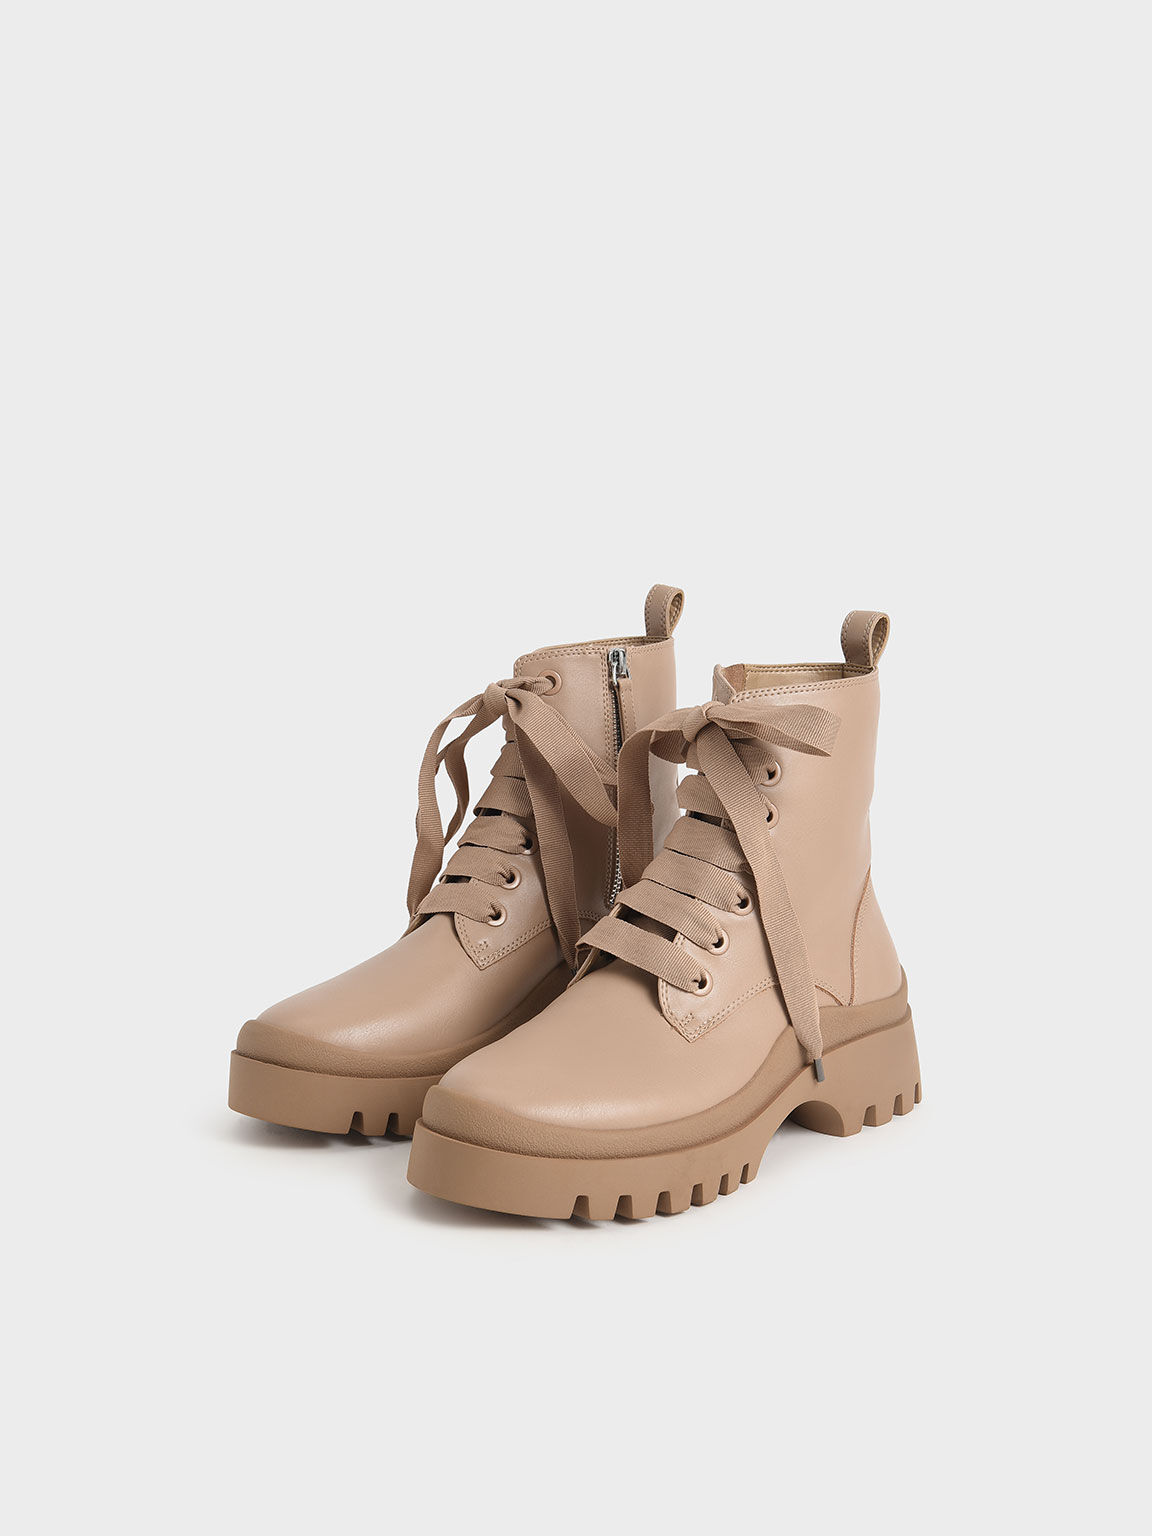 mouggan Collection: Lace-Up Cleated Sole Ankle Boots, Beige, hi-res